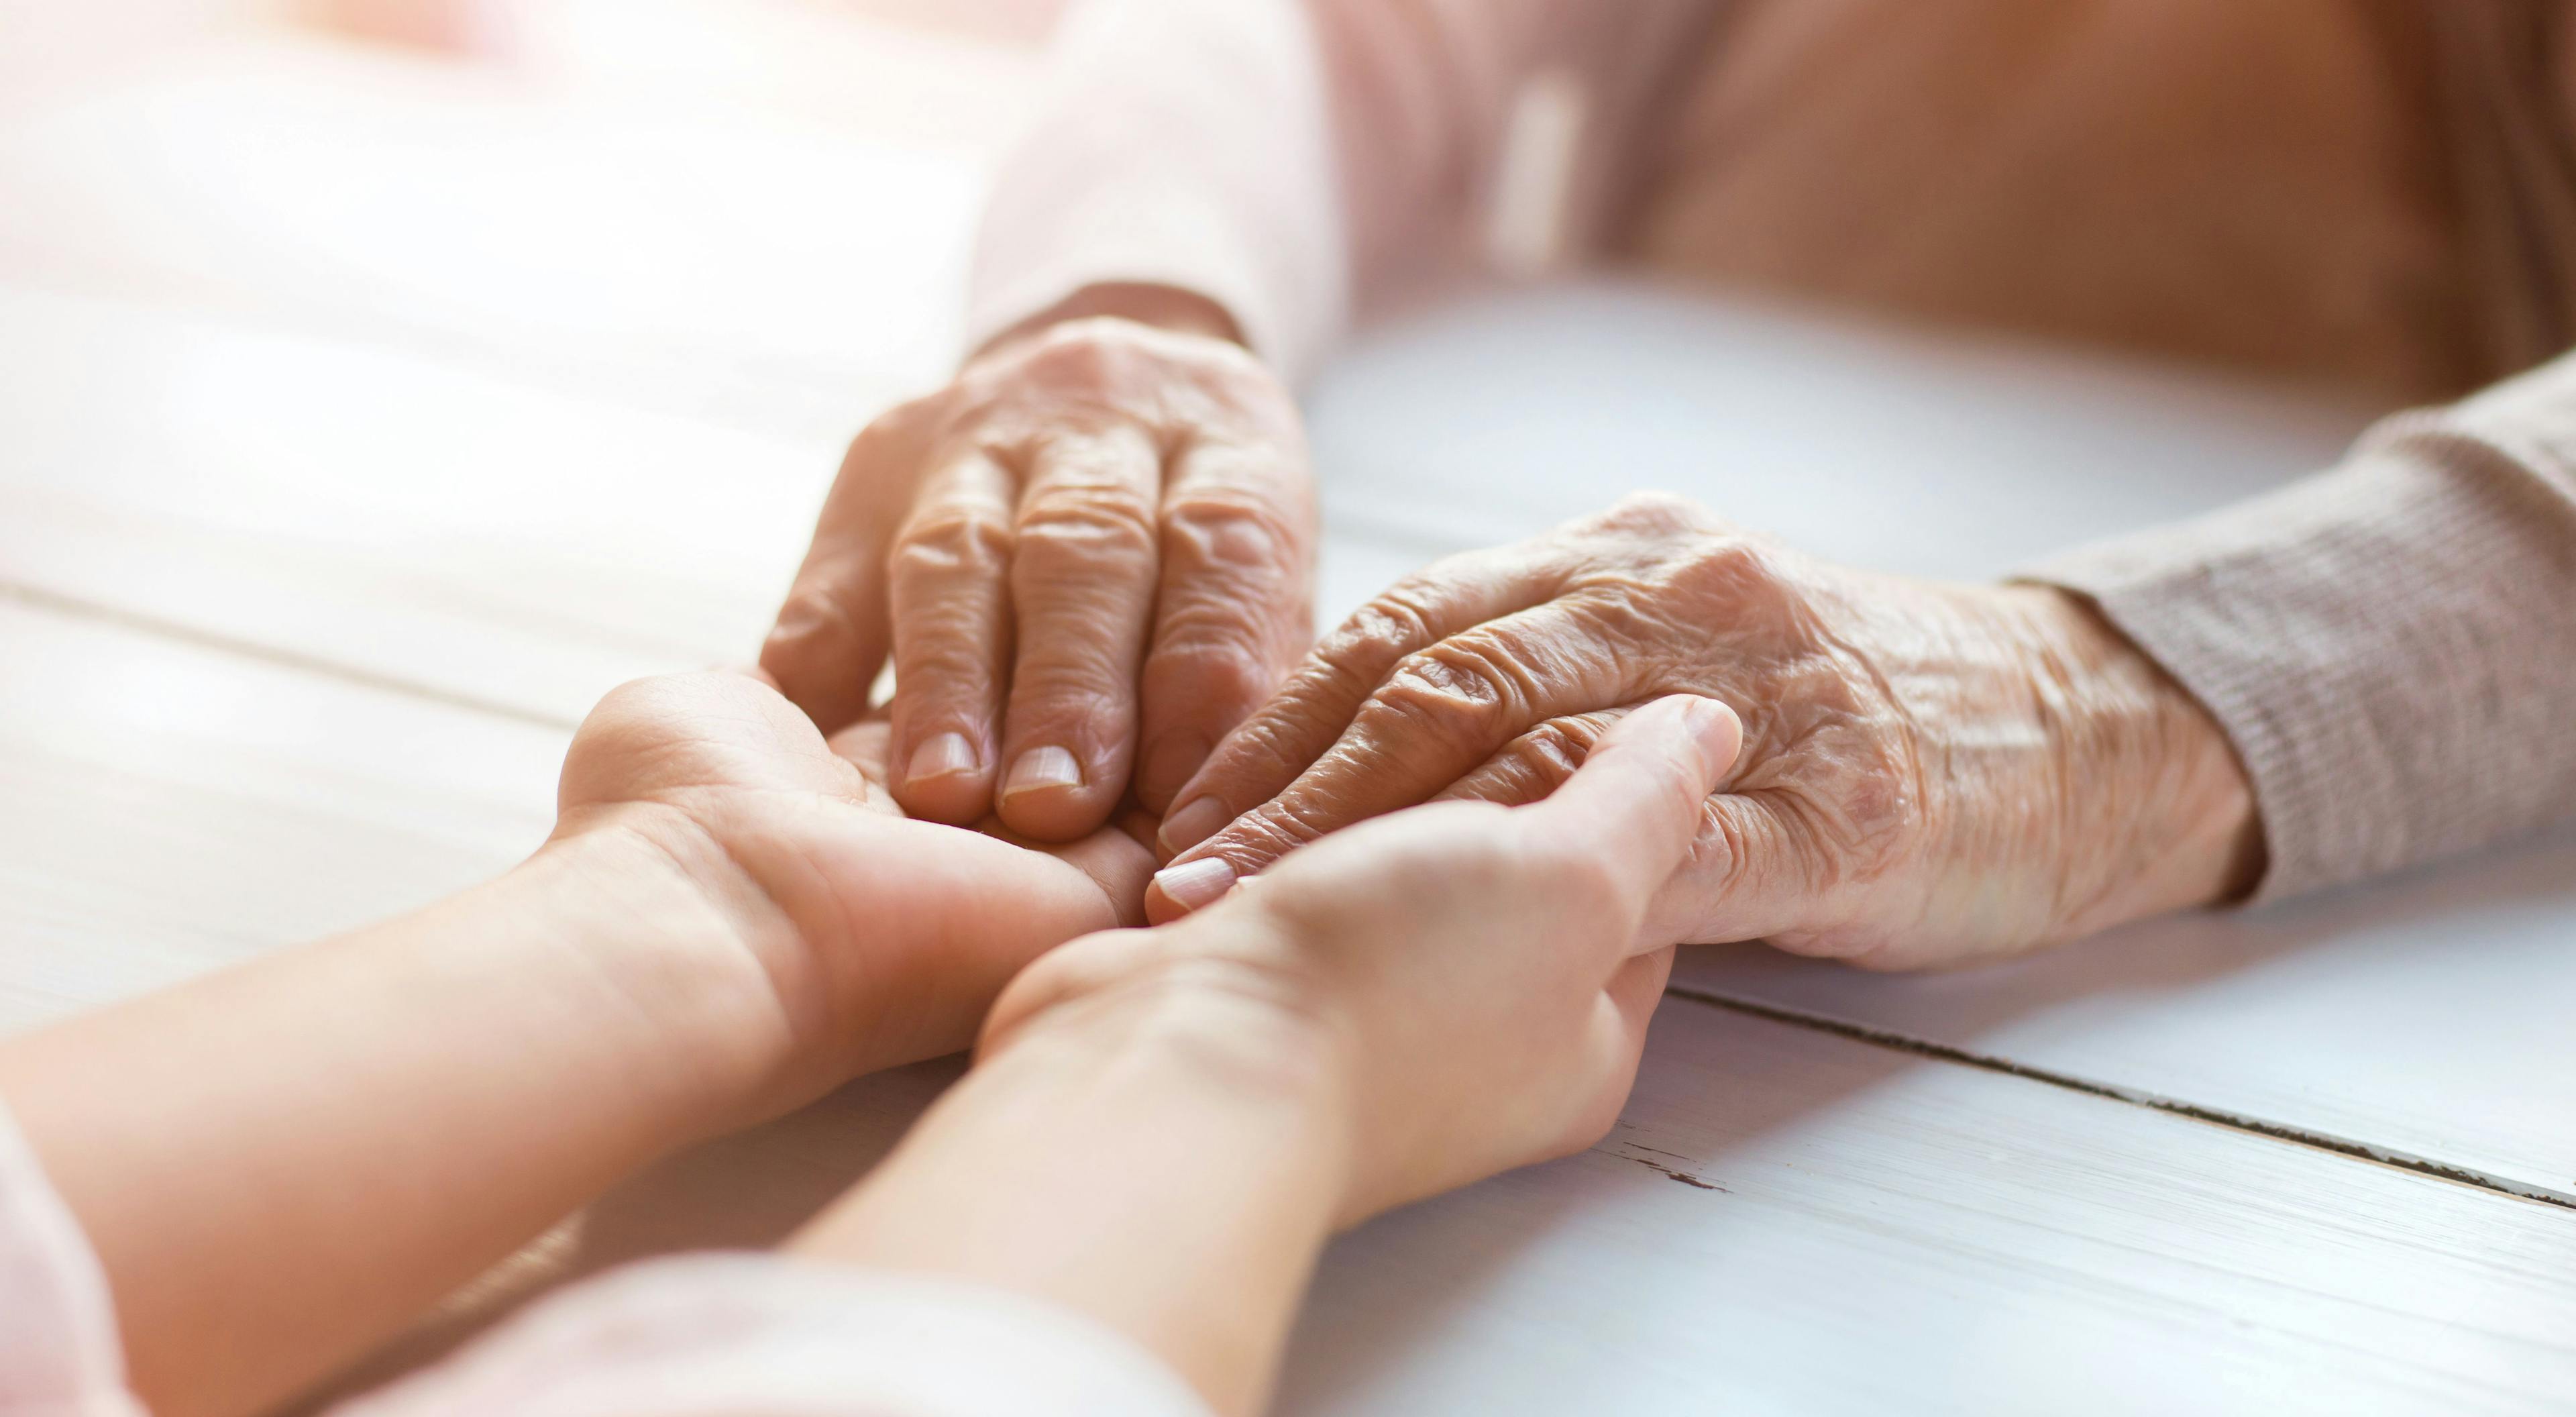 Image of a caregiving holding the hands of a patient.